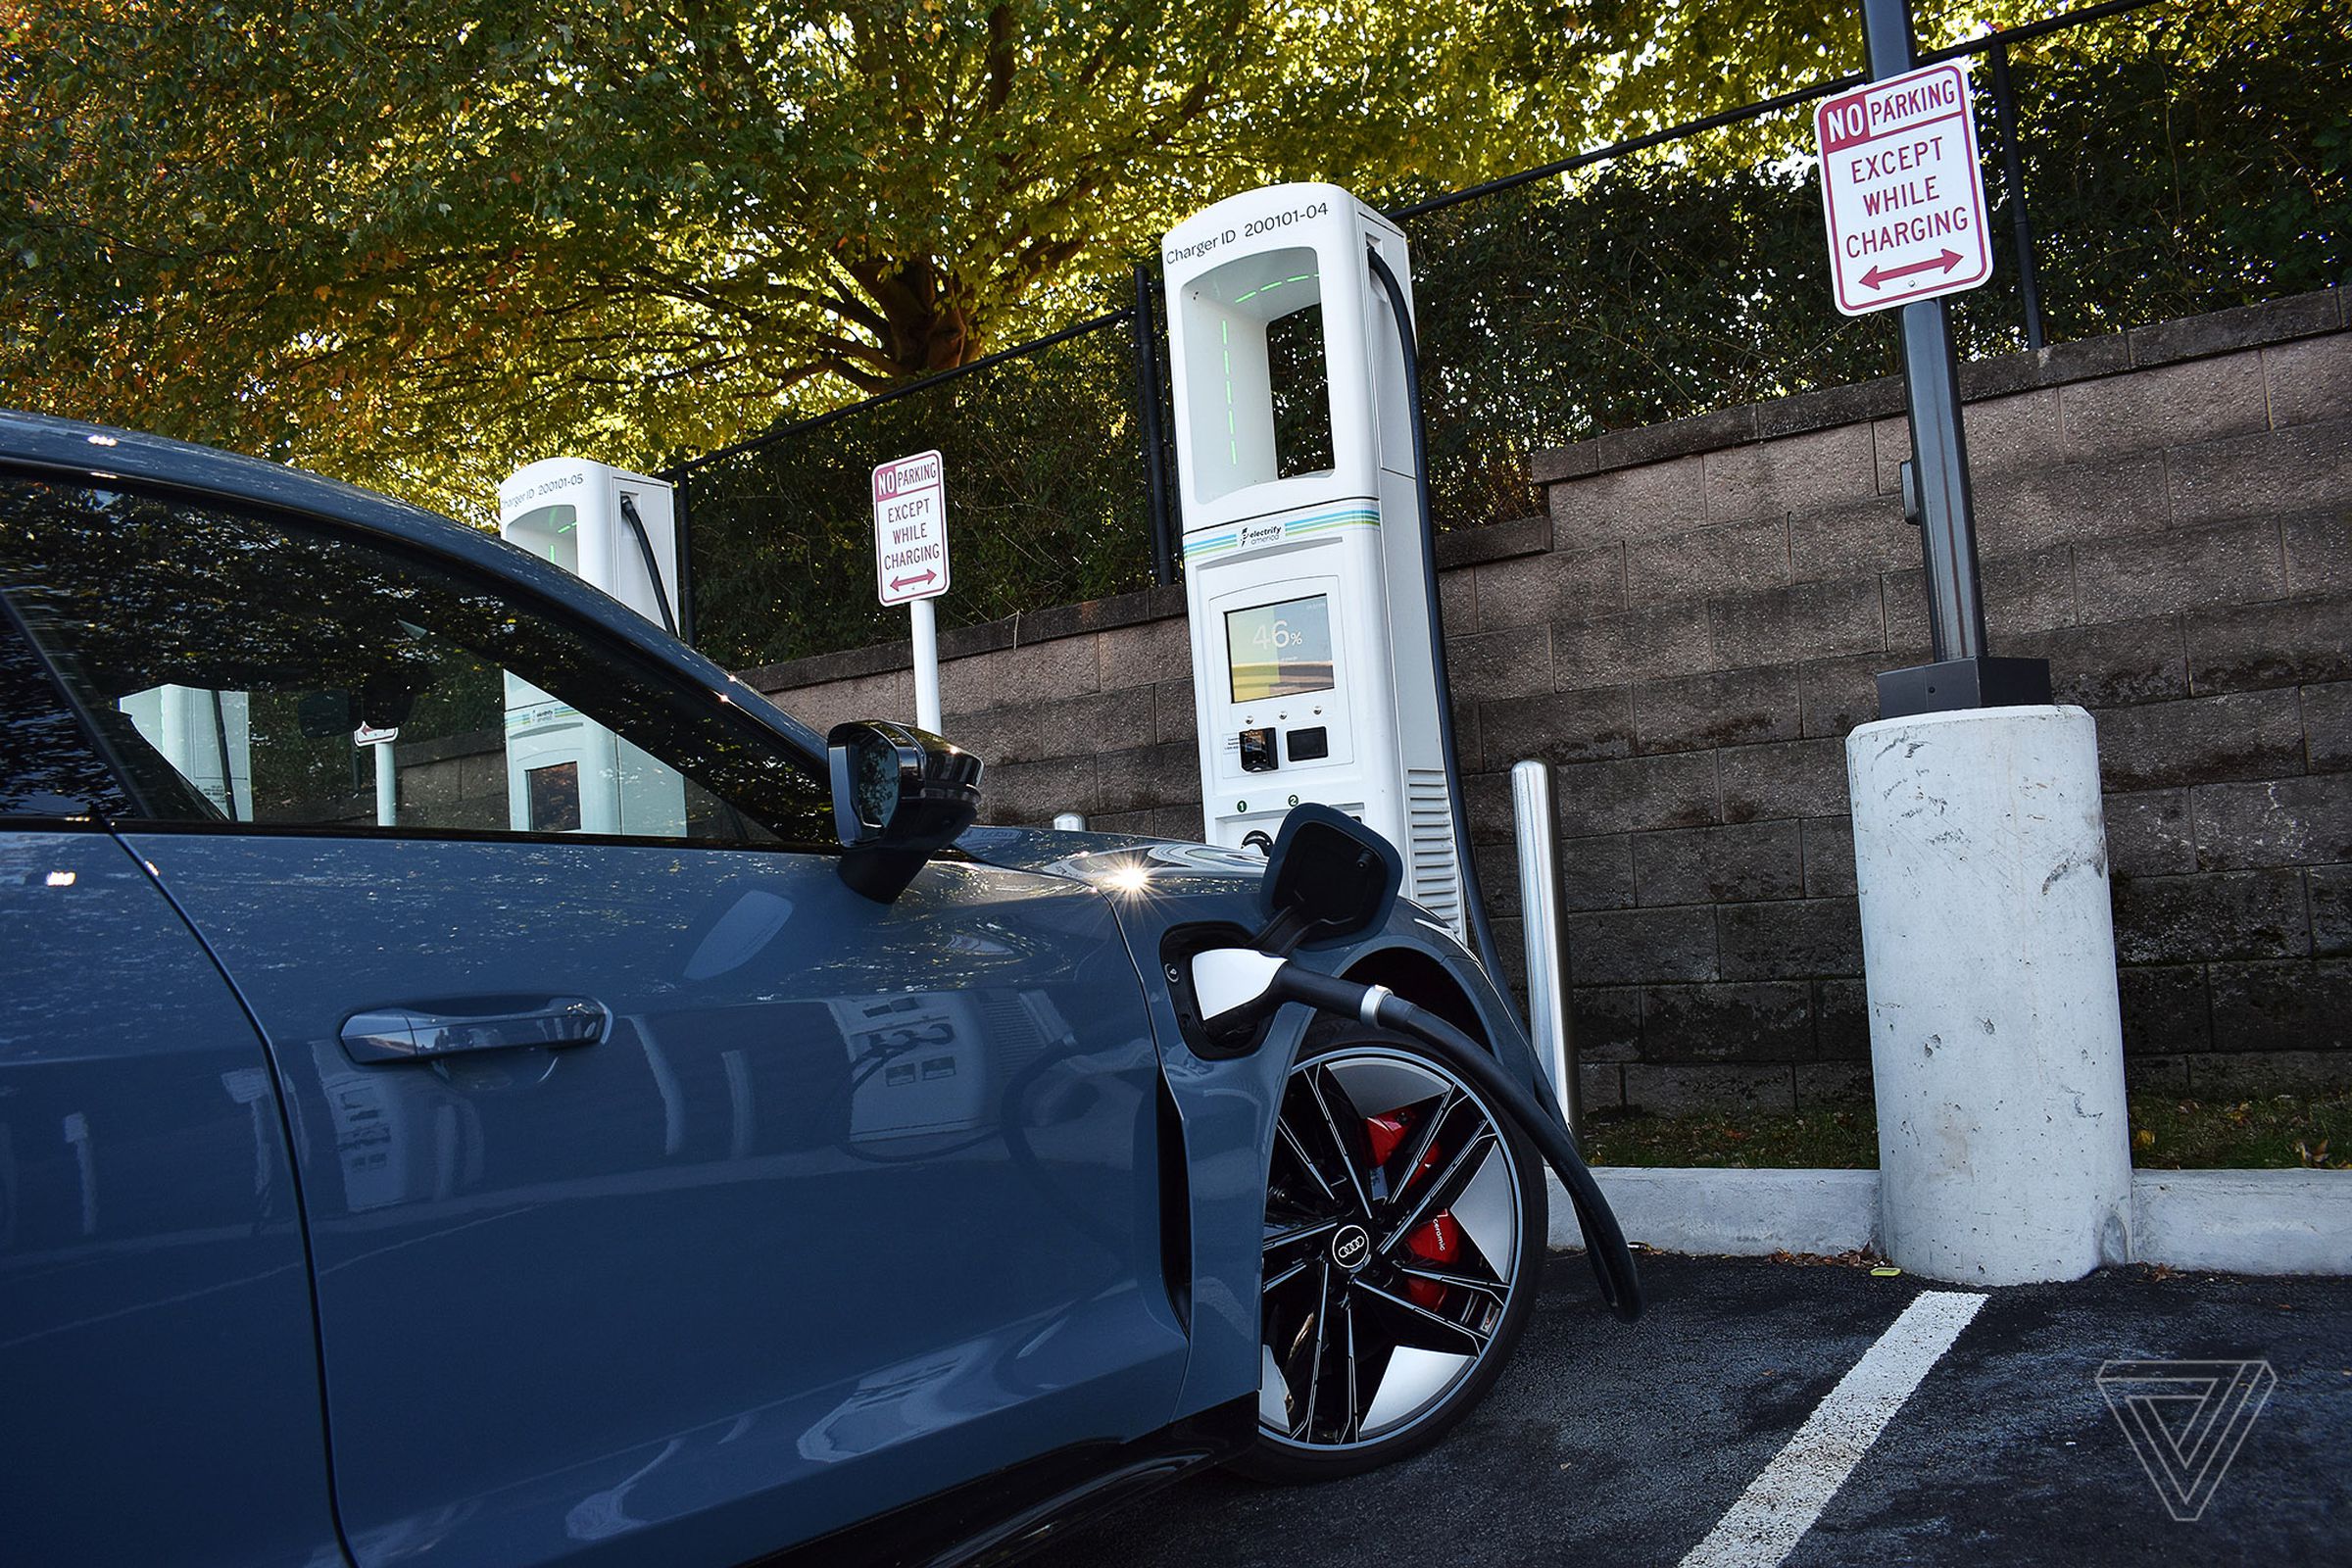 Audi does not have its own charging network, like Tesla.